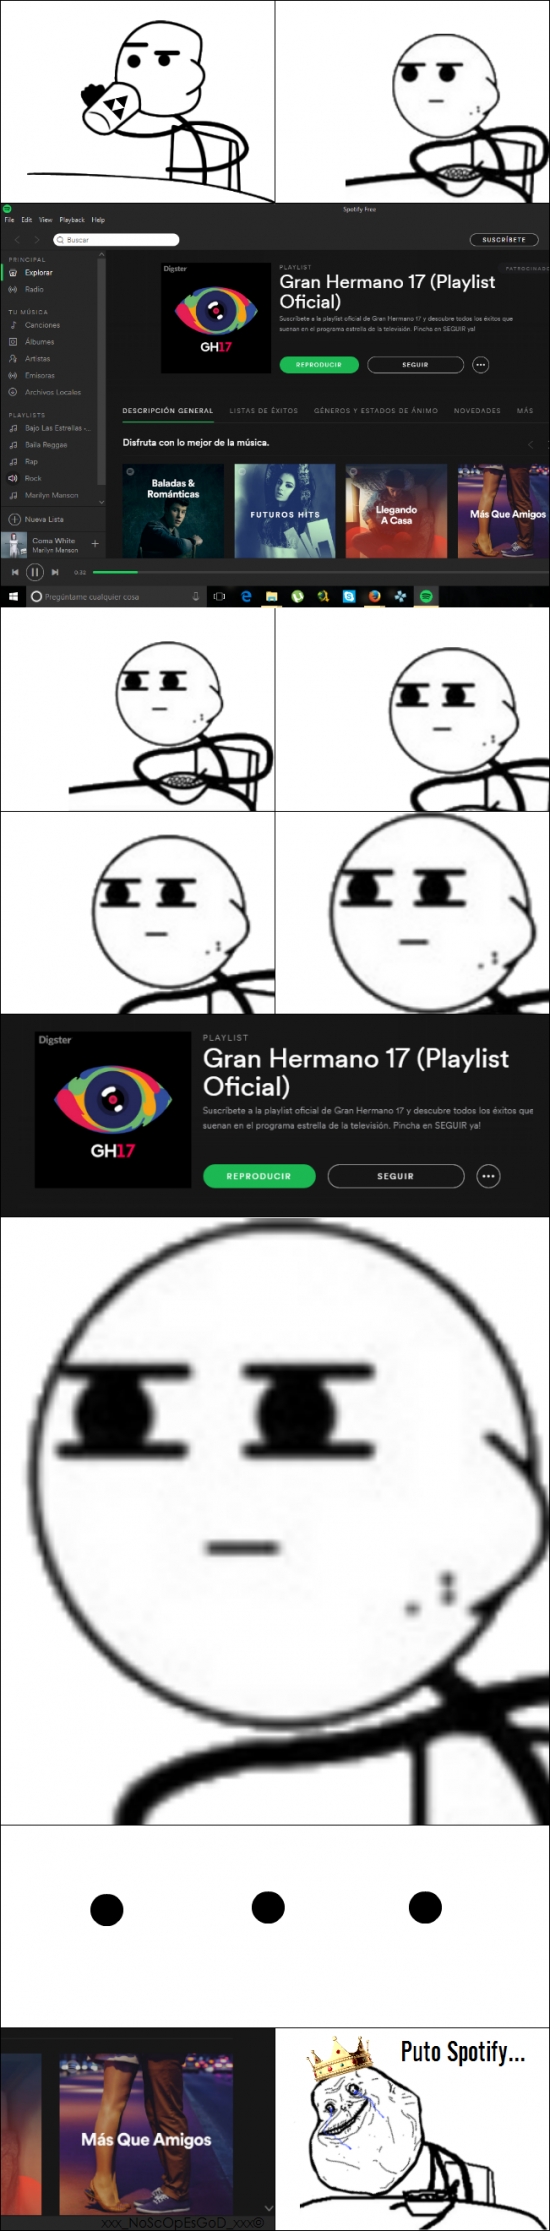 cereal guy,forever alone,friendzone,Spotify